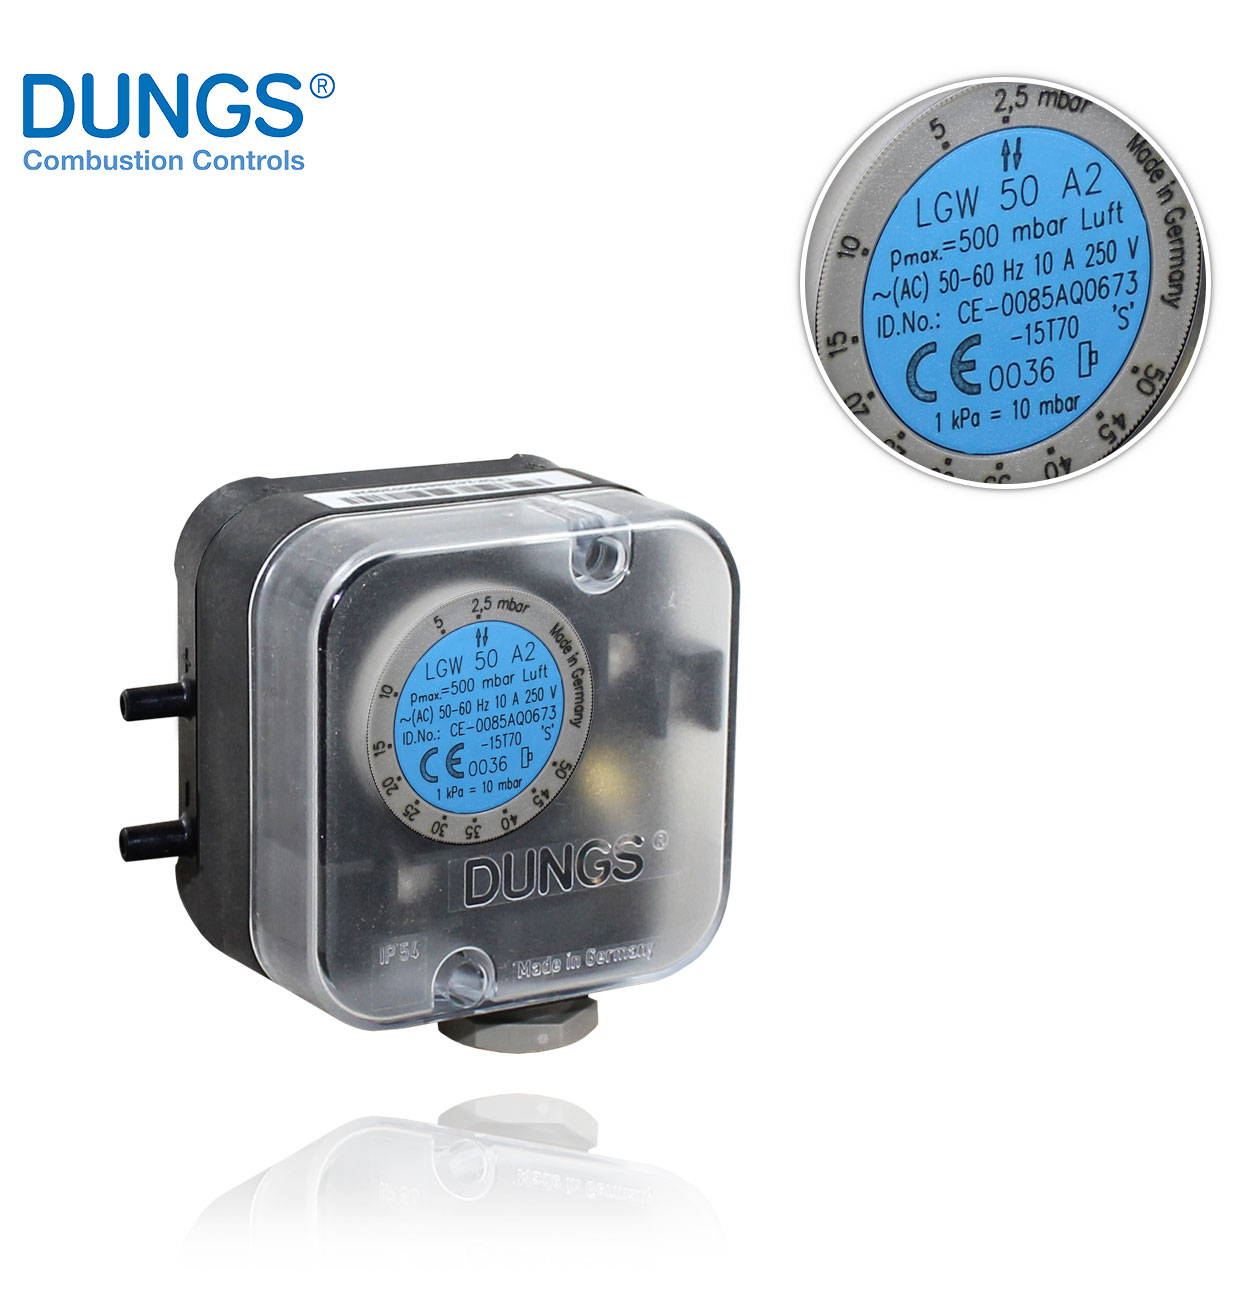 LGW 50 A2 PRESSURE SWITCH DUNGS